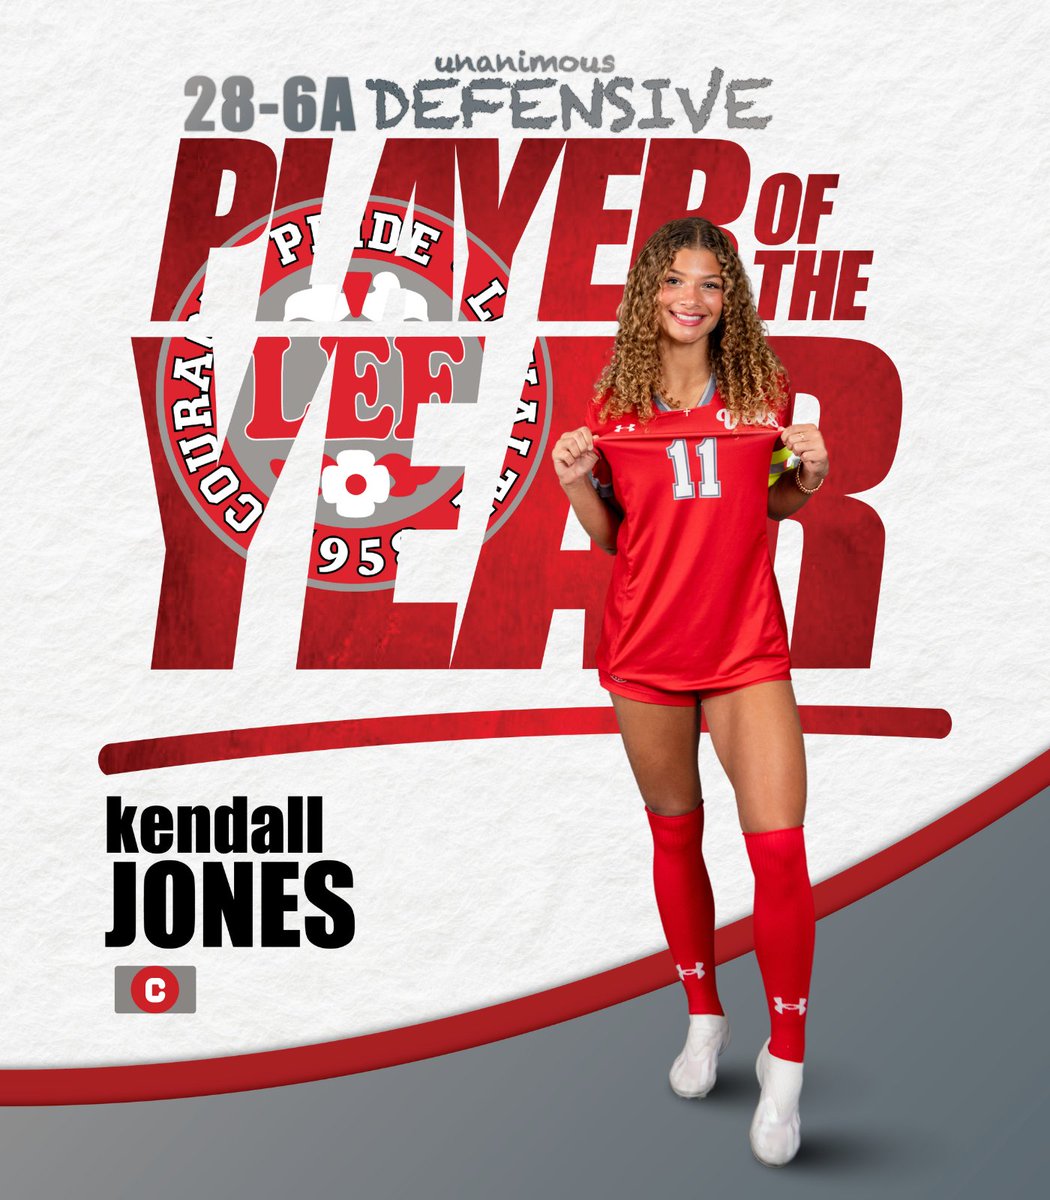 Last but certainly not least, our Senior Captain @kendall_jones11 is 1st Team All-District & the 2024 28-6A Unanimous Defensive Player of the Year 👏 #GoVols